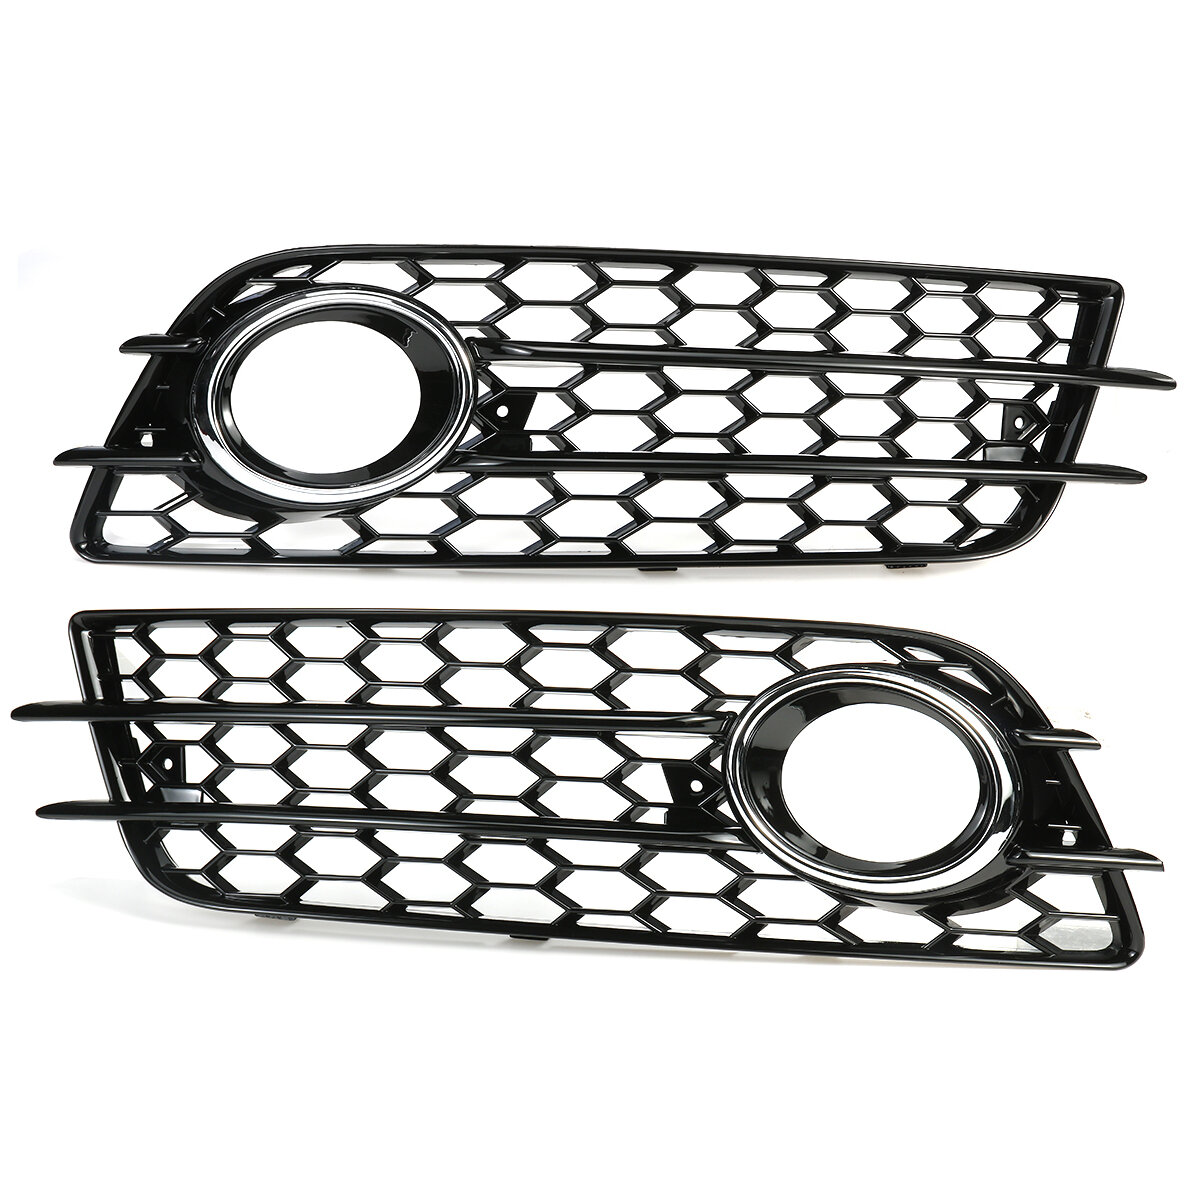 Image of Plating Front Fog Light Cover Honeycomb Hex Grille Grill For Audi A4 B8 S-Line S4 2008-2012